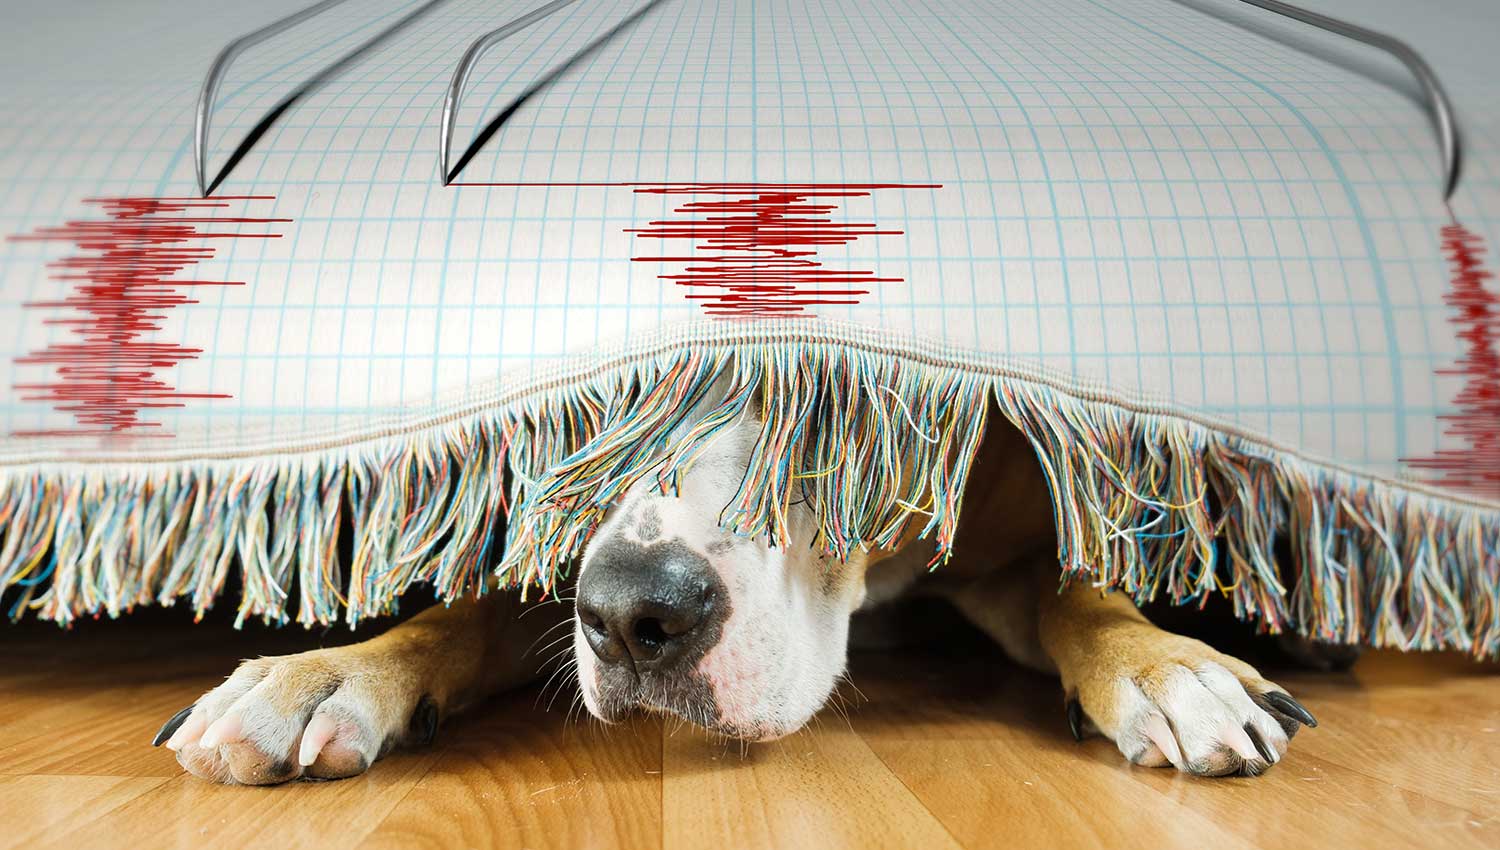 Can Animals Feel an Impending Earthquake?